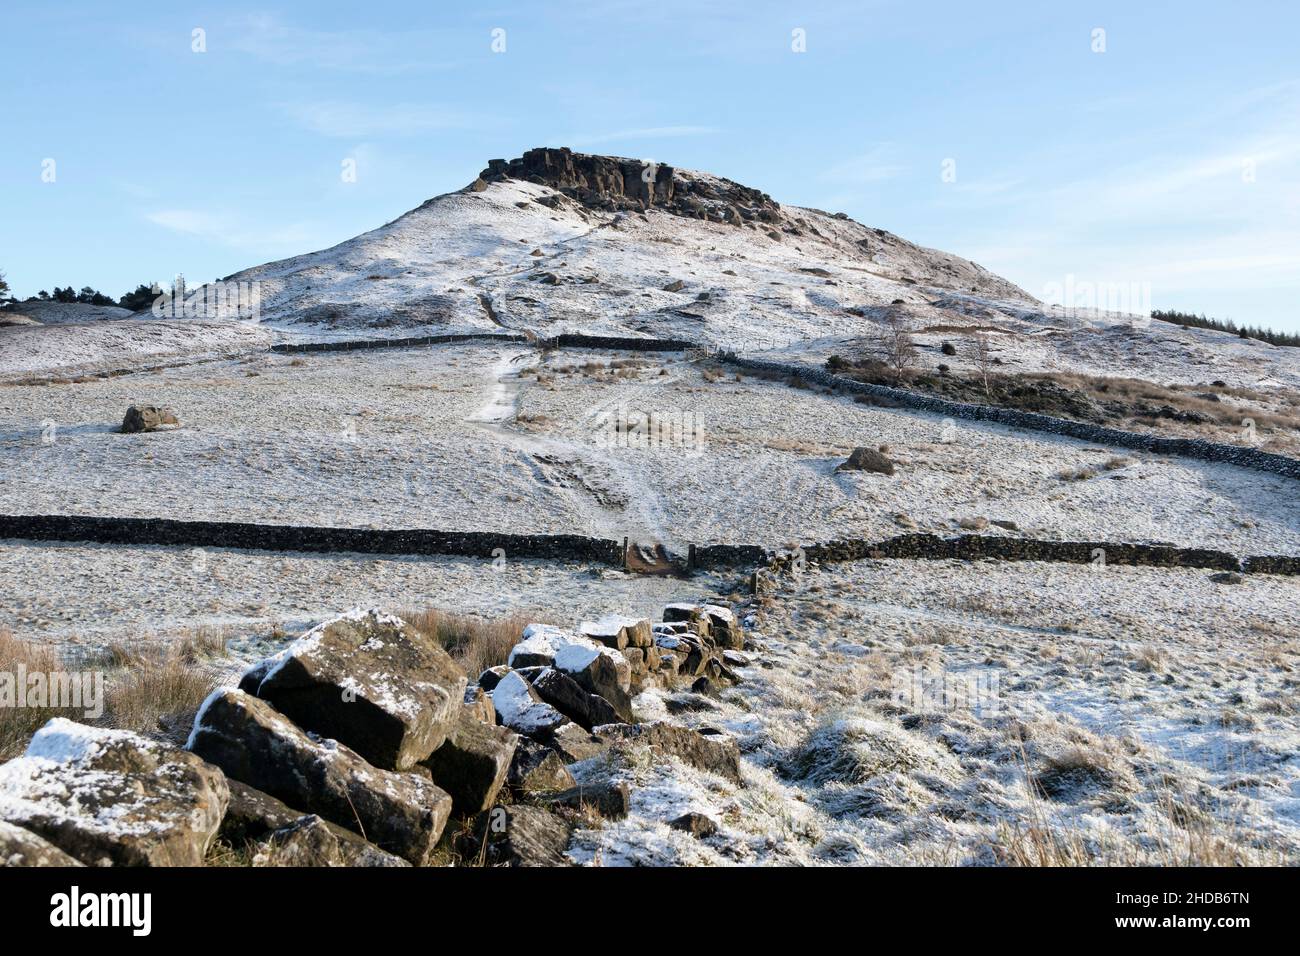 The Wainstones in Winter, Cleveland Way, North Yorkshire Moors National Park, Regno Unito Foto Stock